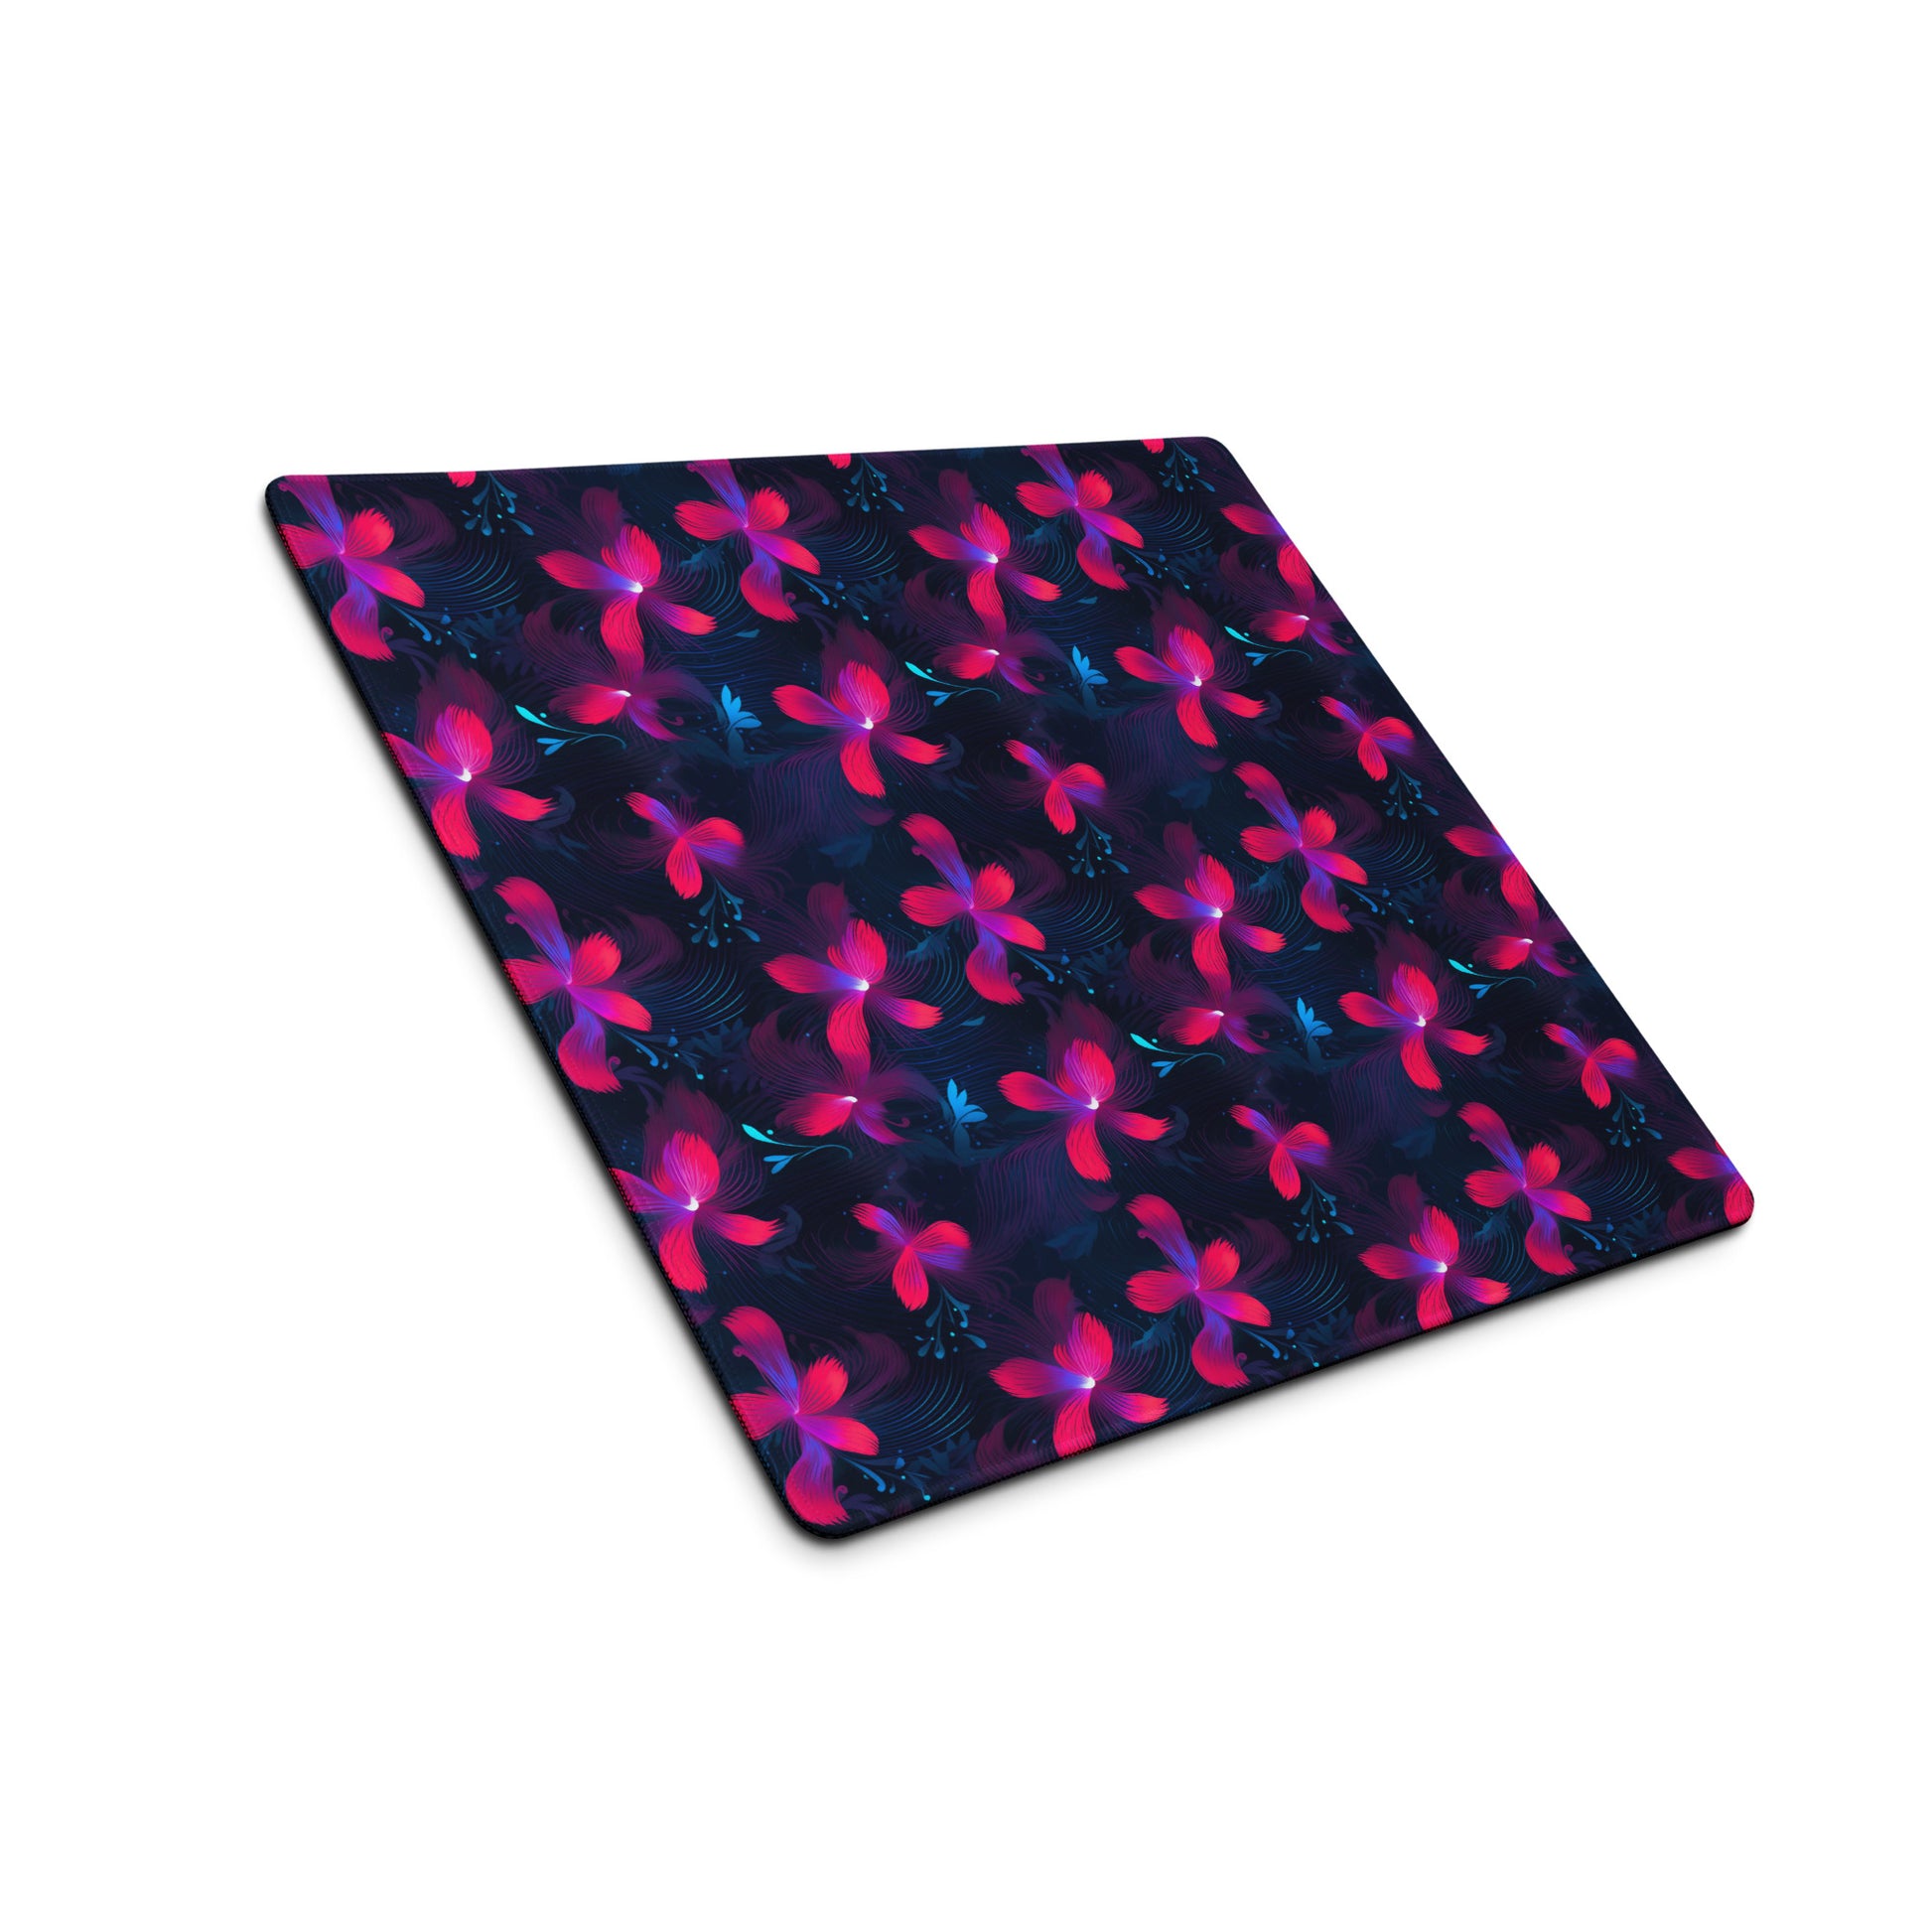 A 18" x 16" desk pad with neon pink and blue floral pattern sitting at an angle.